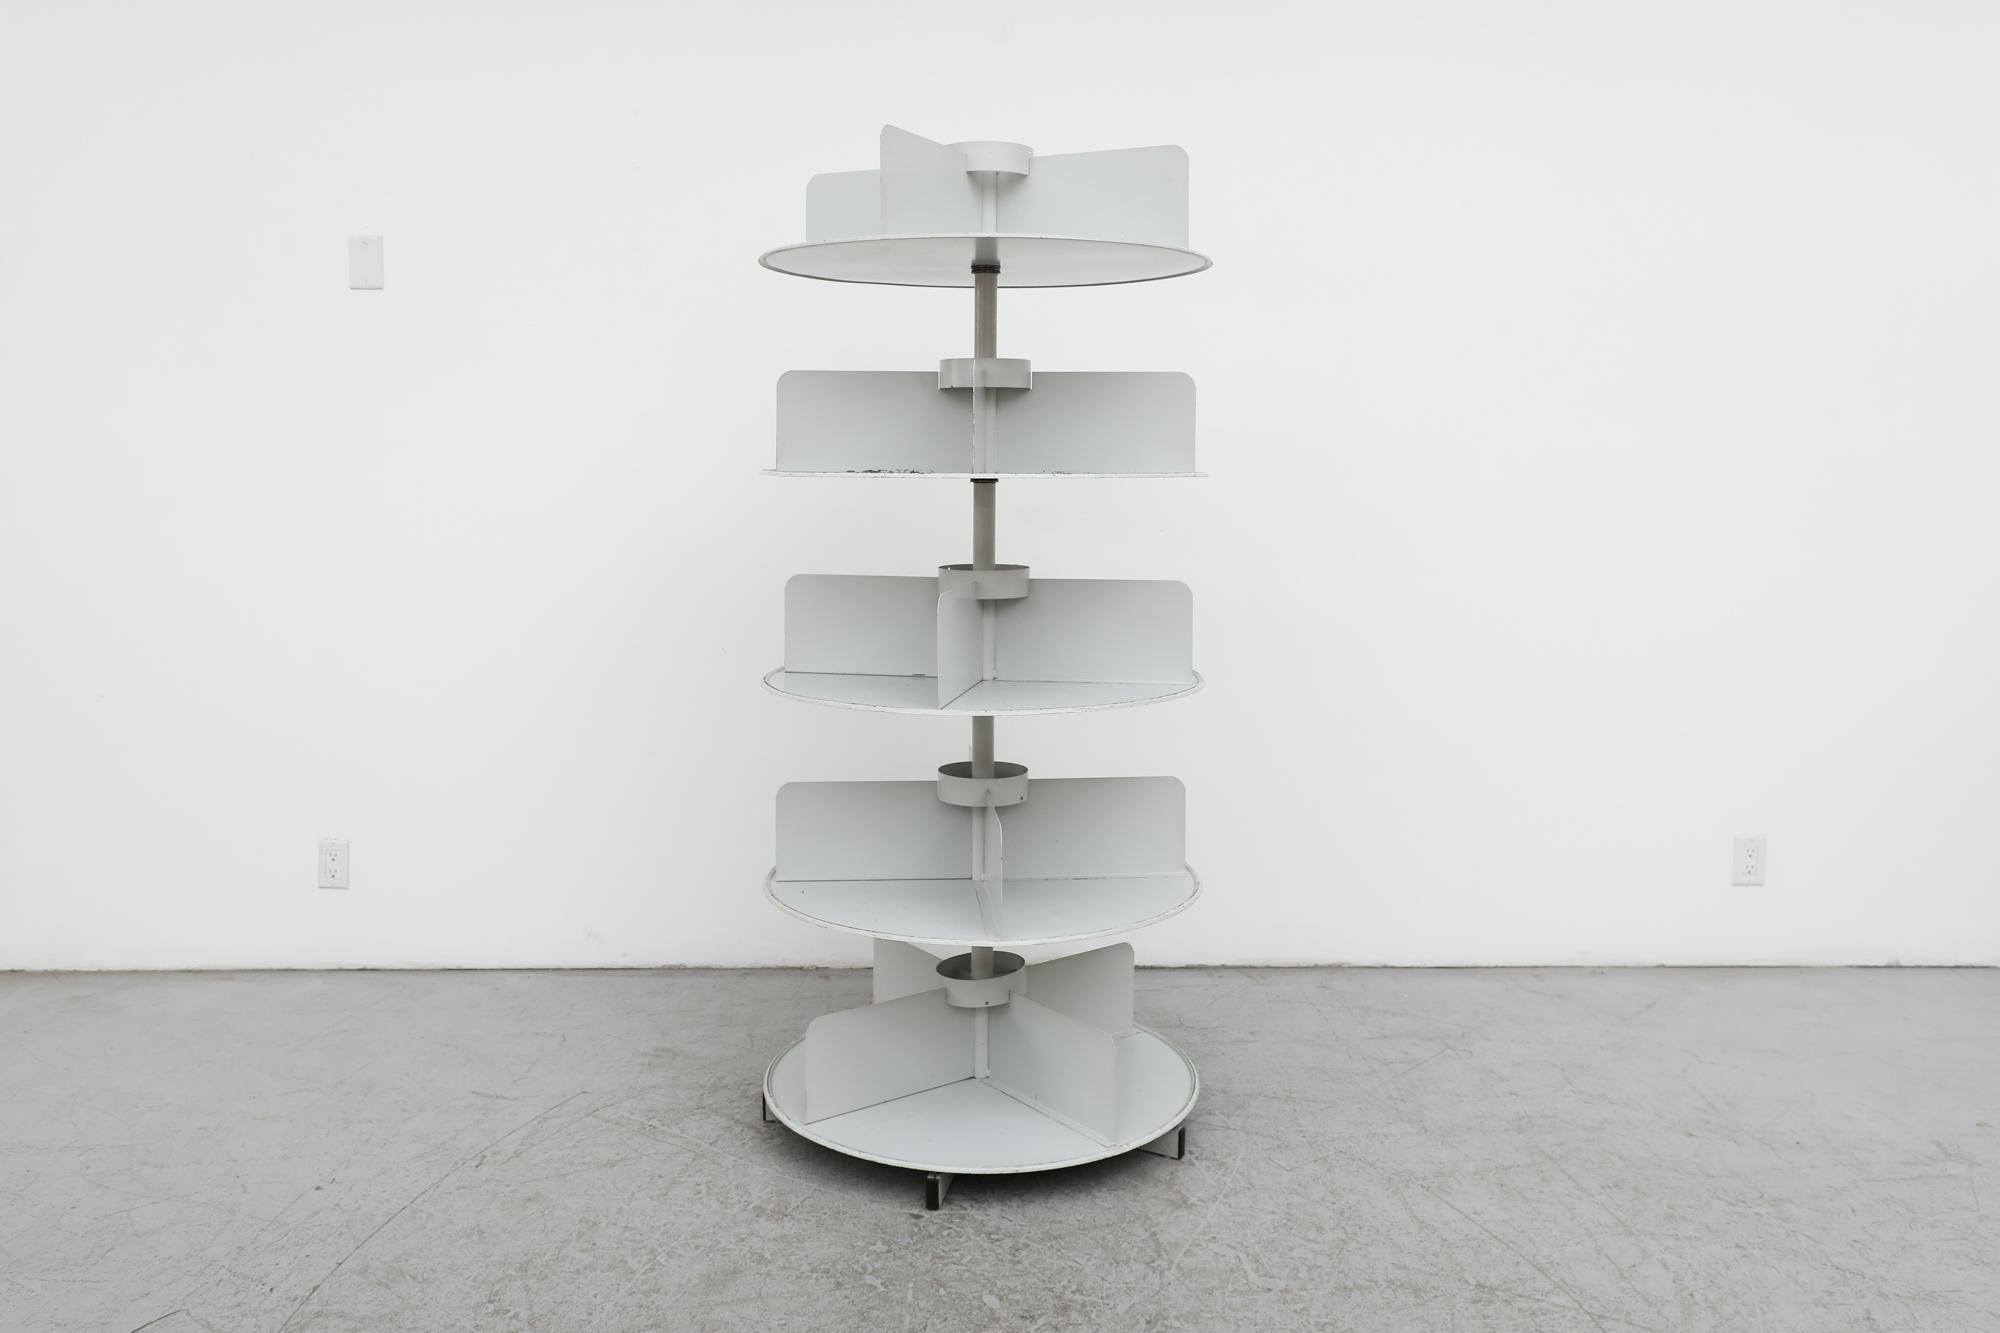 1960's Ahrend de Cirkel large industrial grey enameled metal bookshelf with rotating shelves. Each circular shelf is divided into four sections. Founded in 1896, Ahrend initially focused on small goods with the first office furniture (which was to